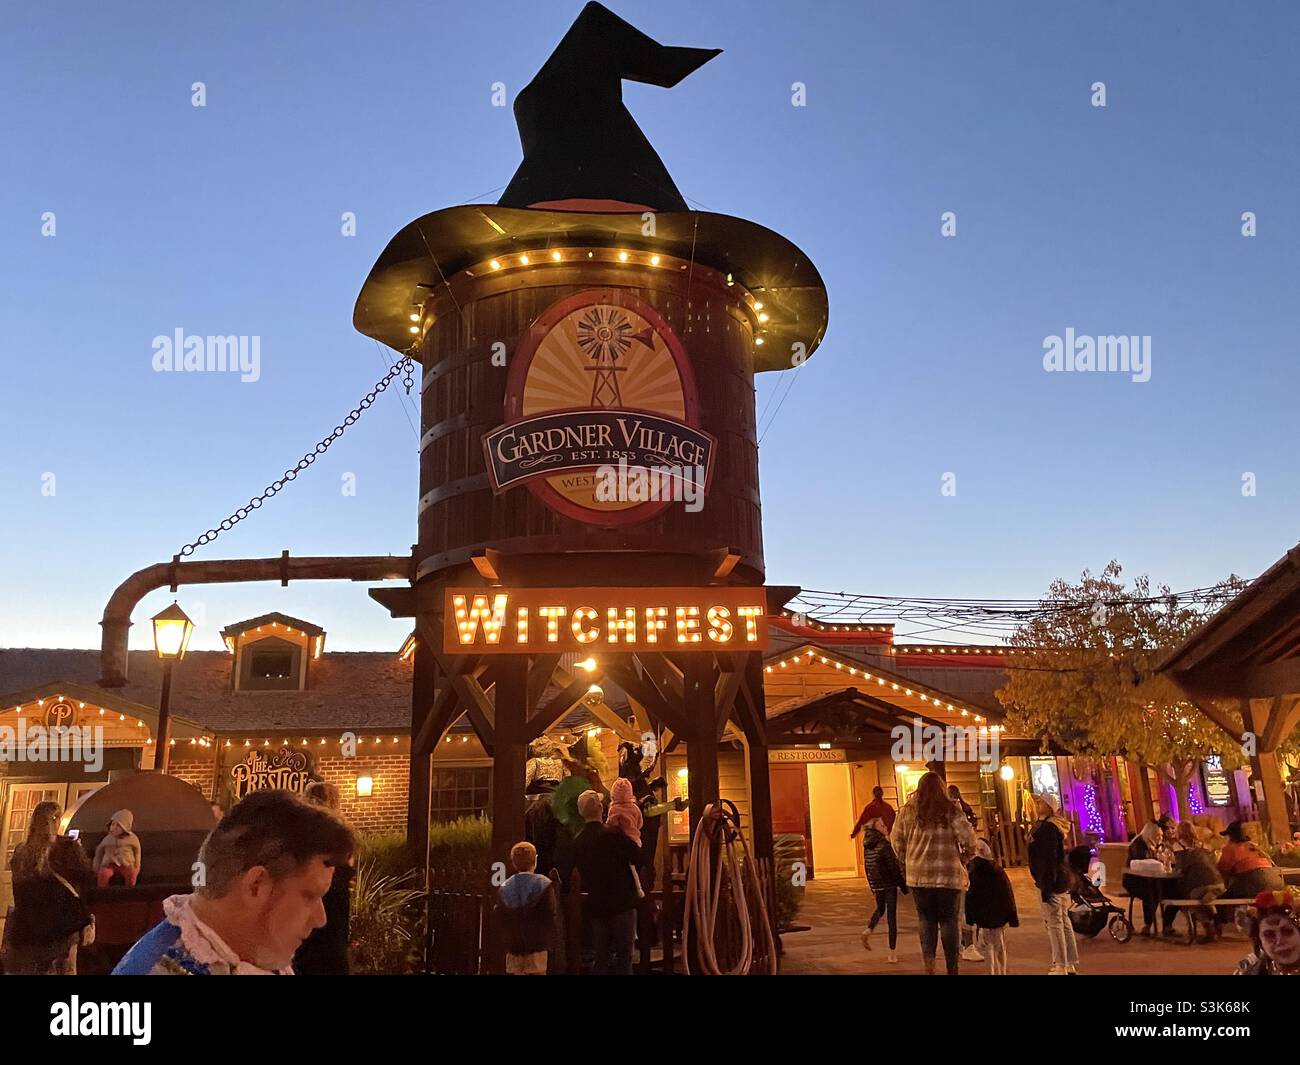 People milling and walking about midst the decorations at Gardner Village’s “WitchFest” in the Salt Lake valley of Utah, USA. Stock Photo